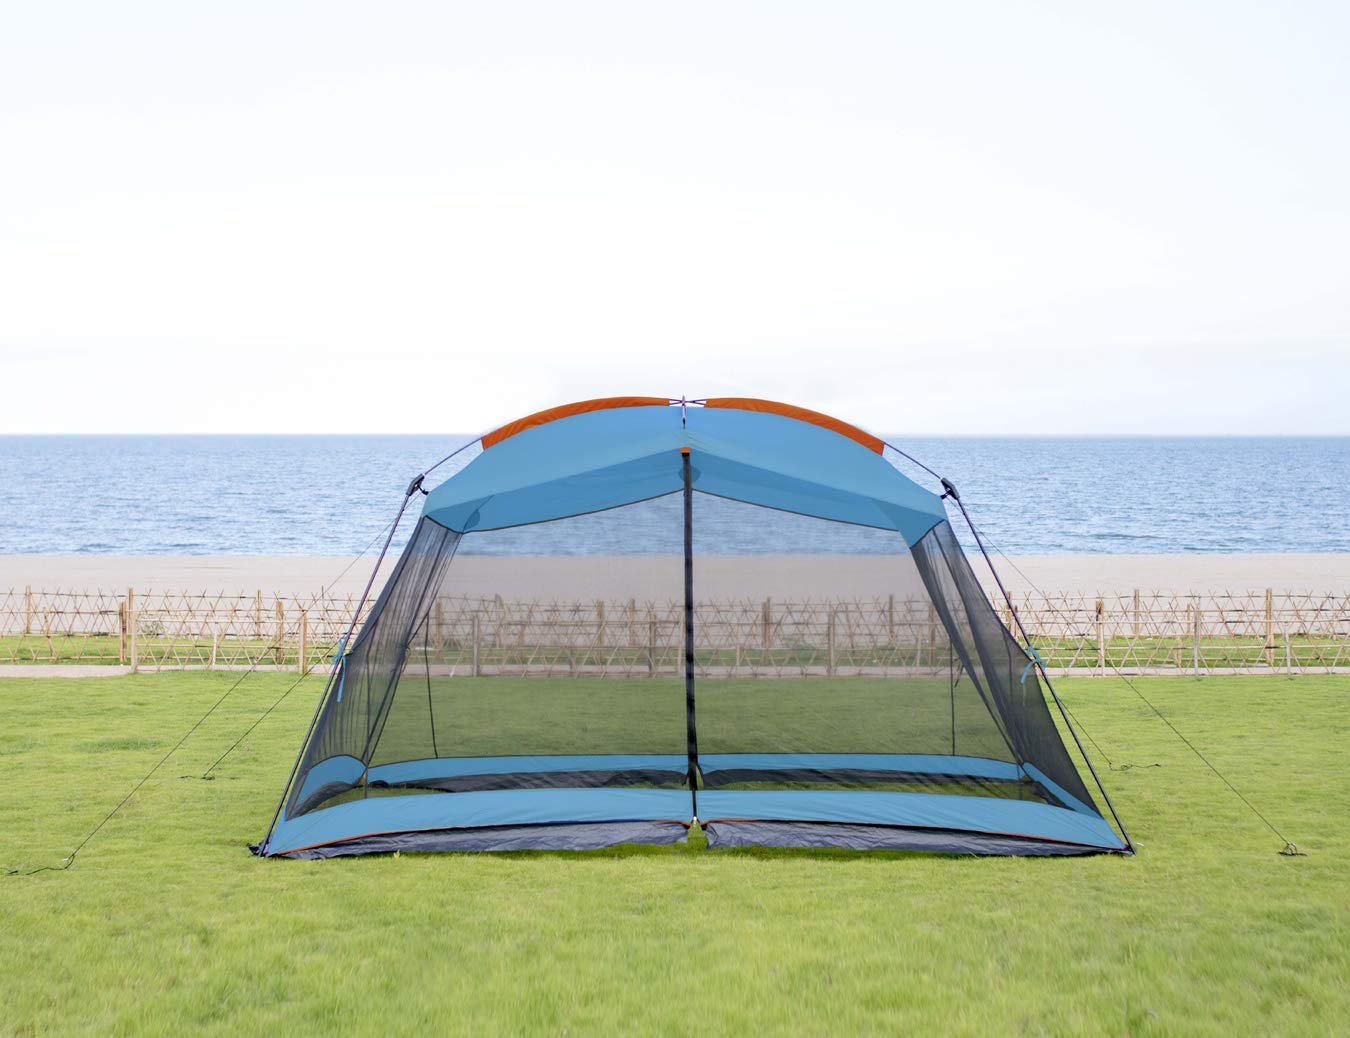 RORAIMA Bugs Proof Roomy Screen House 13'x9'x6.9', Instant Canopy Shelter Screen Tent,Easy Installation Within Mins and Good for Family Picnic Suitable for 5-8 People